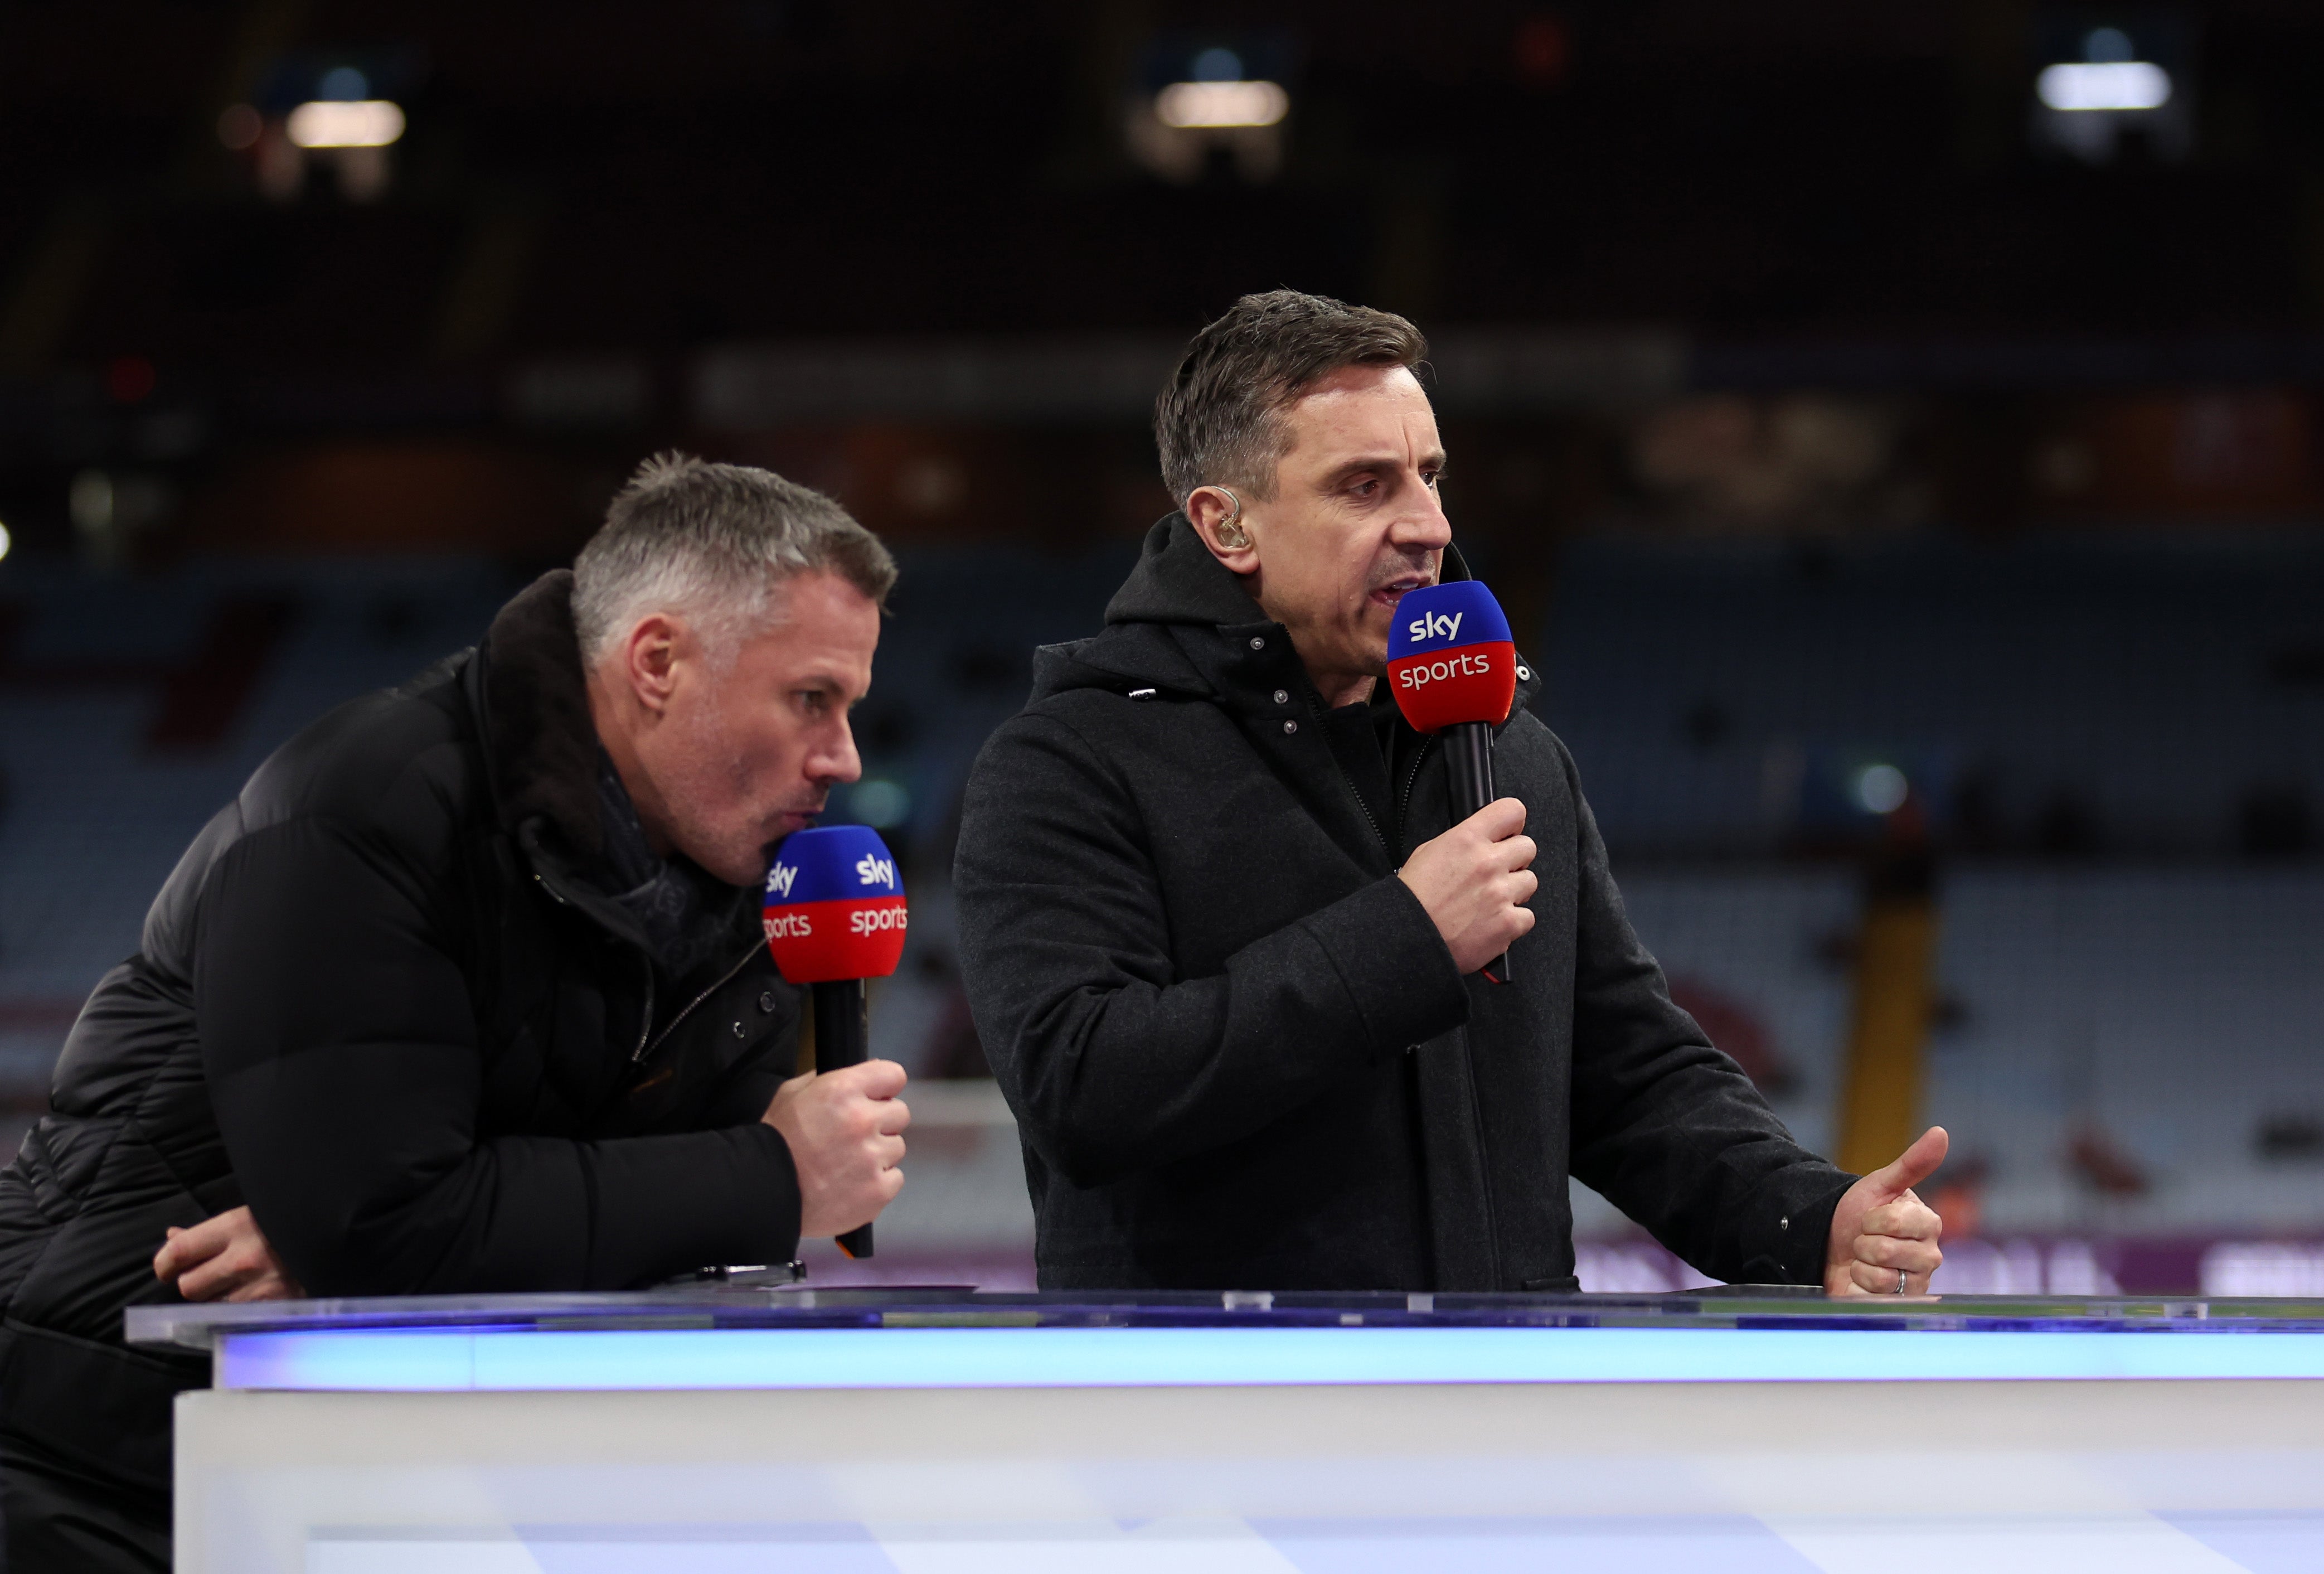 Jamie Carragher and Gary Neville heavily criticised United this season